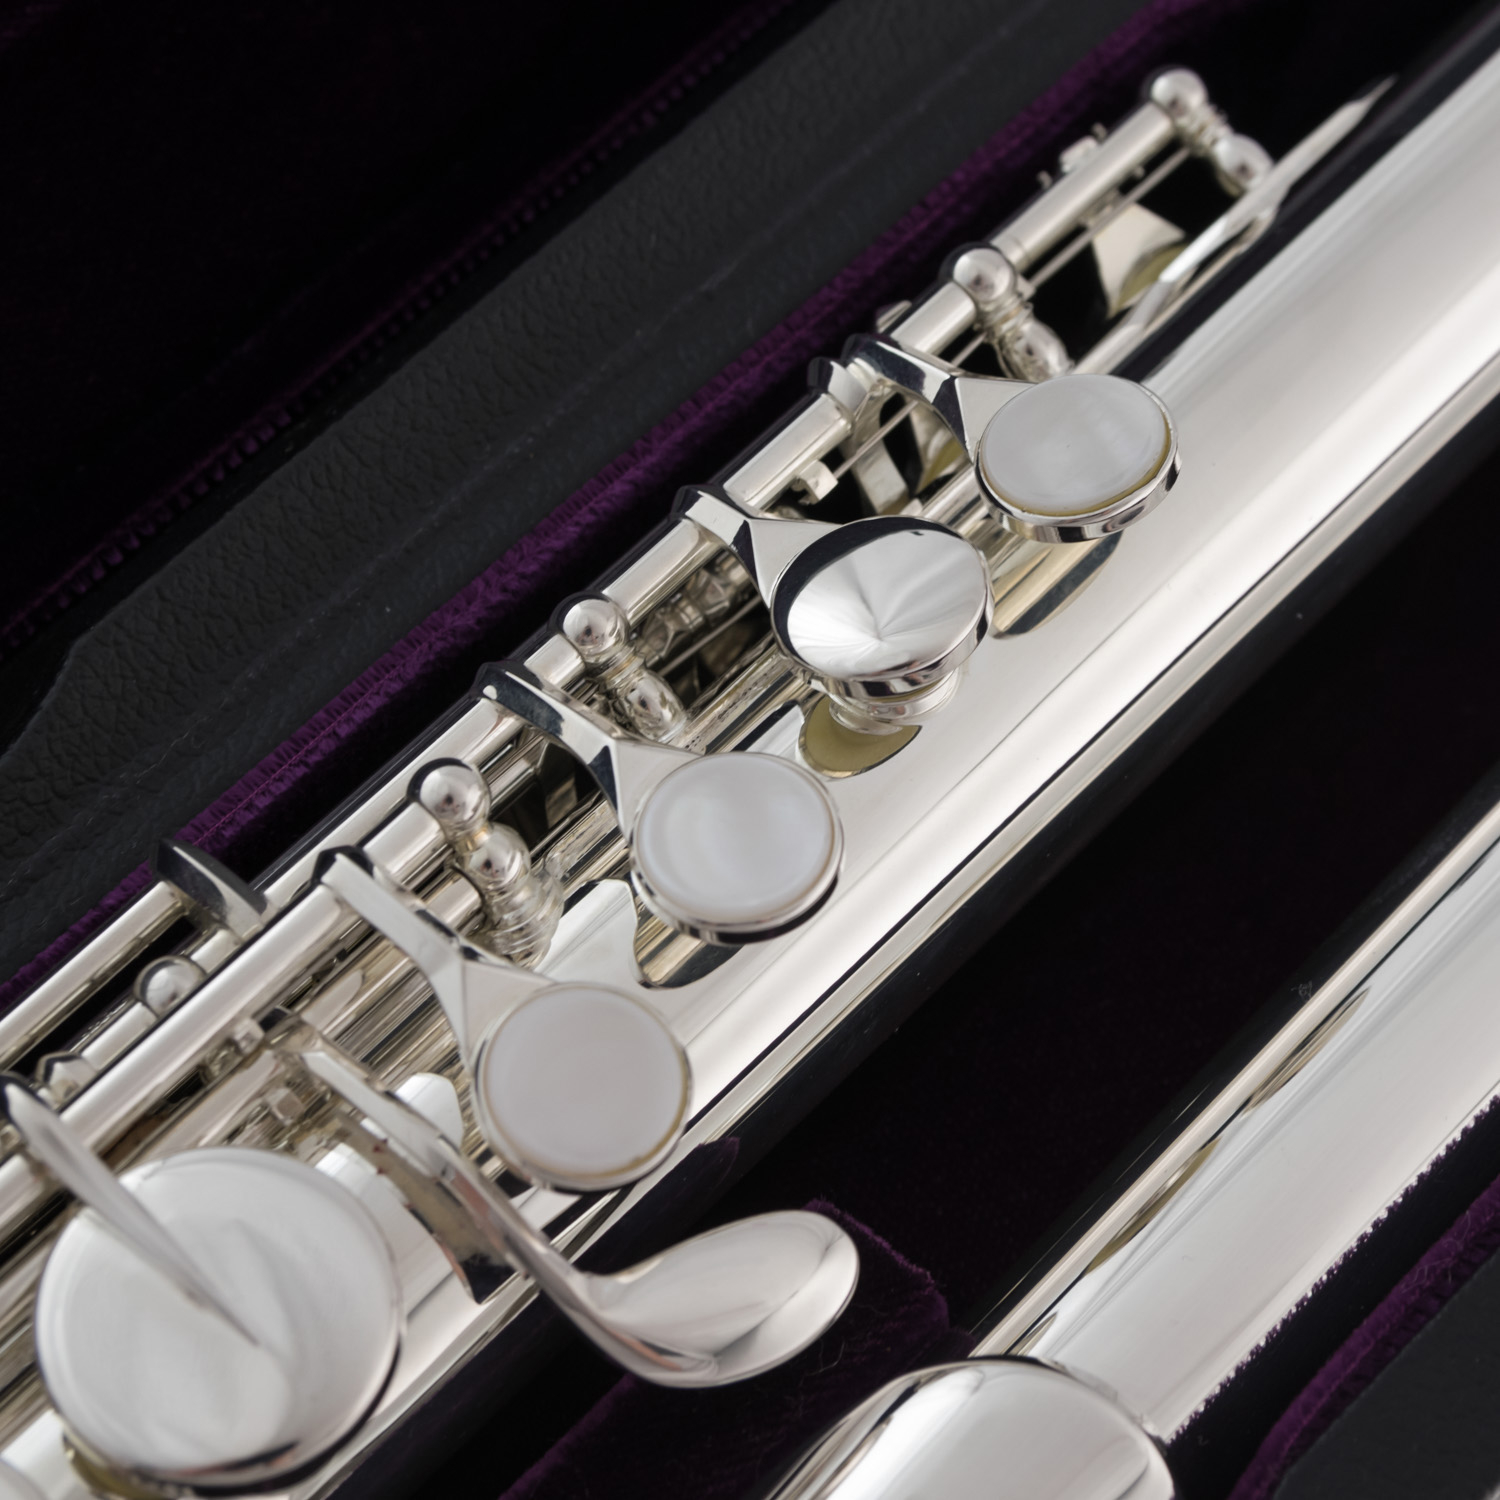 Trevor James Alto Flute - Performer Series w/Sterling Silver Straight Head Joint - 33225